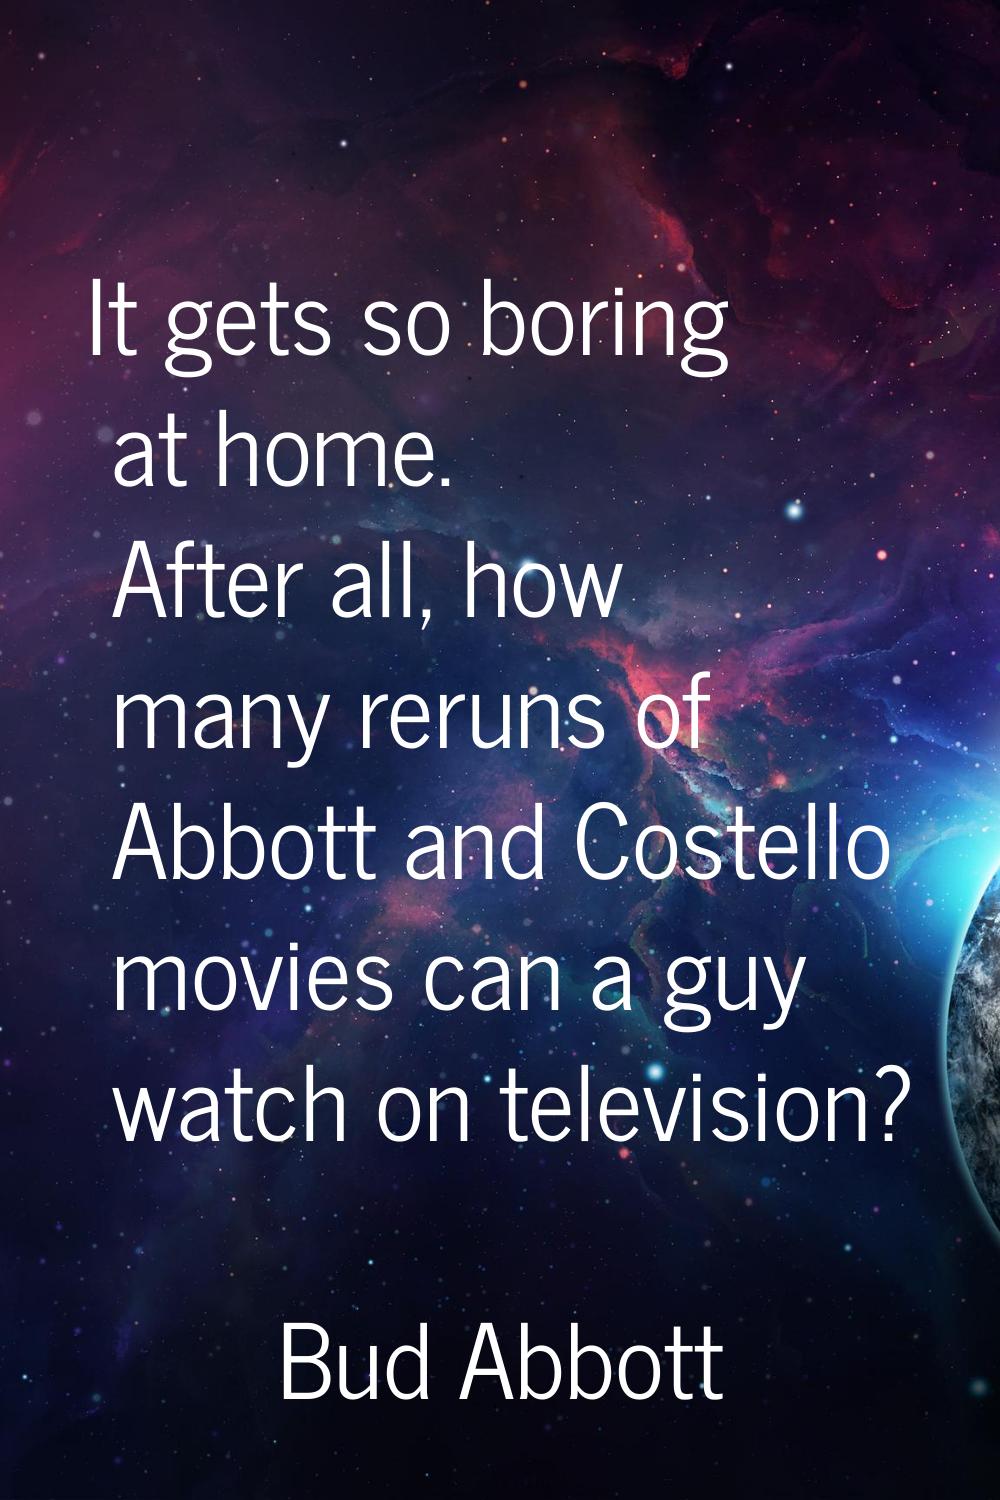 It gets so boring at home. After all, how many reruns of Abbott and Costello movies can a guy watch